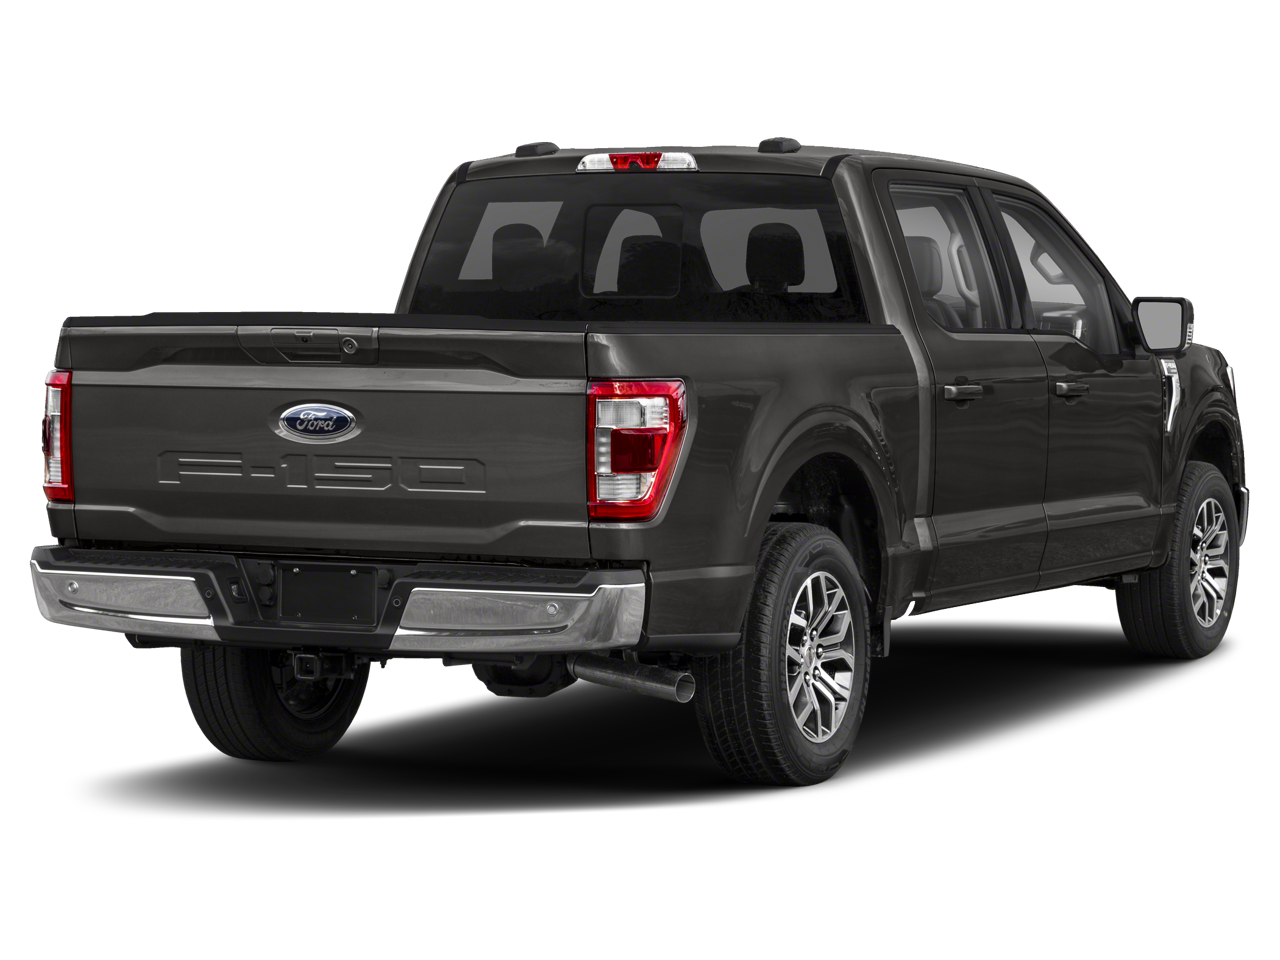 2021 Ford F-150 Lariat 5.5FT Short Bed